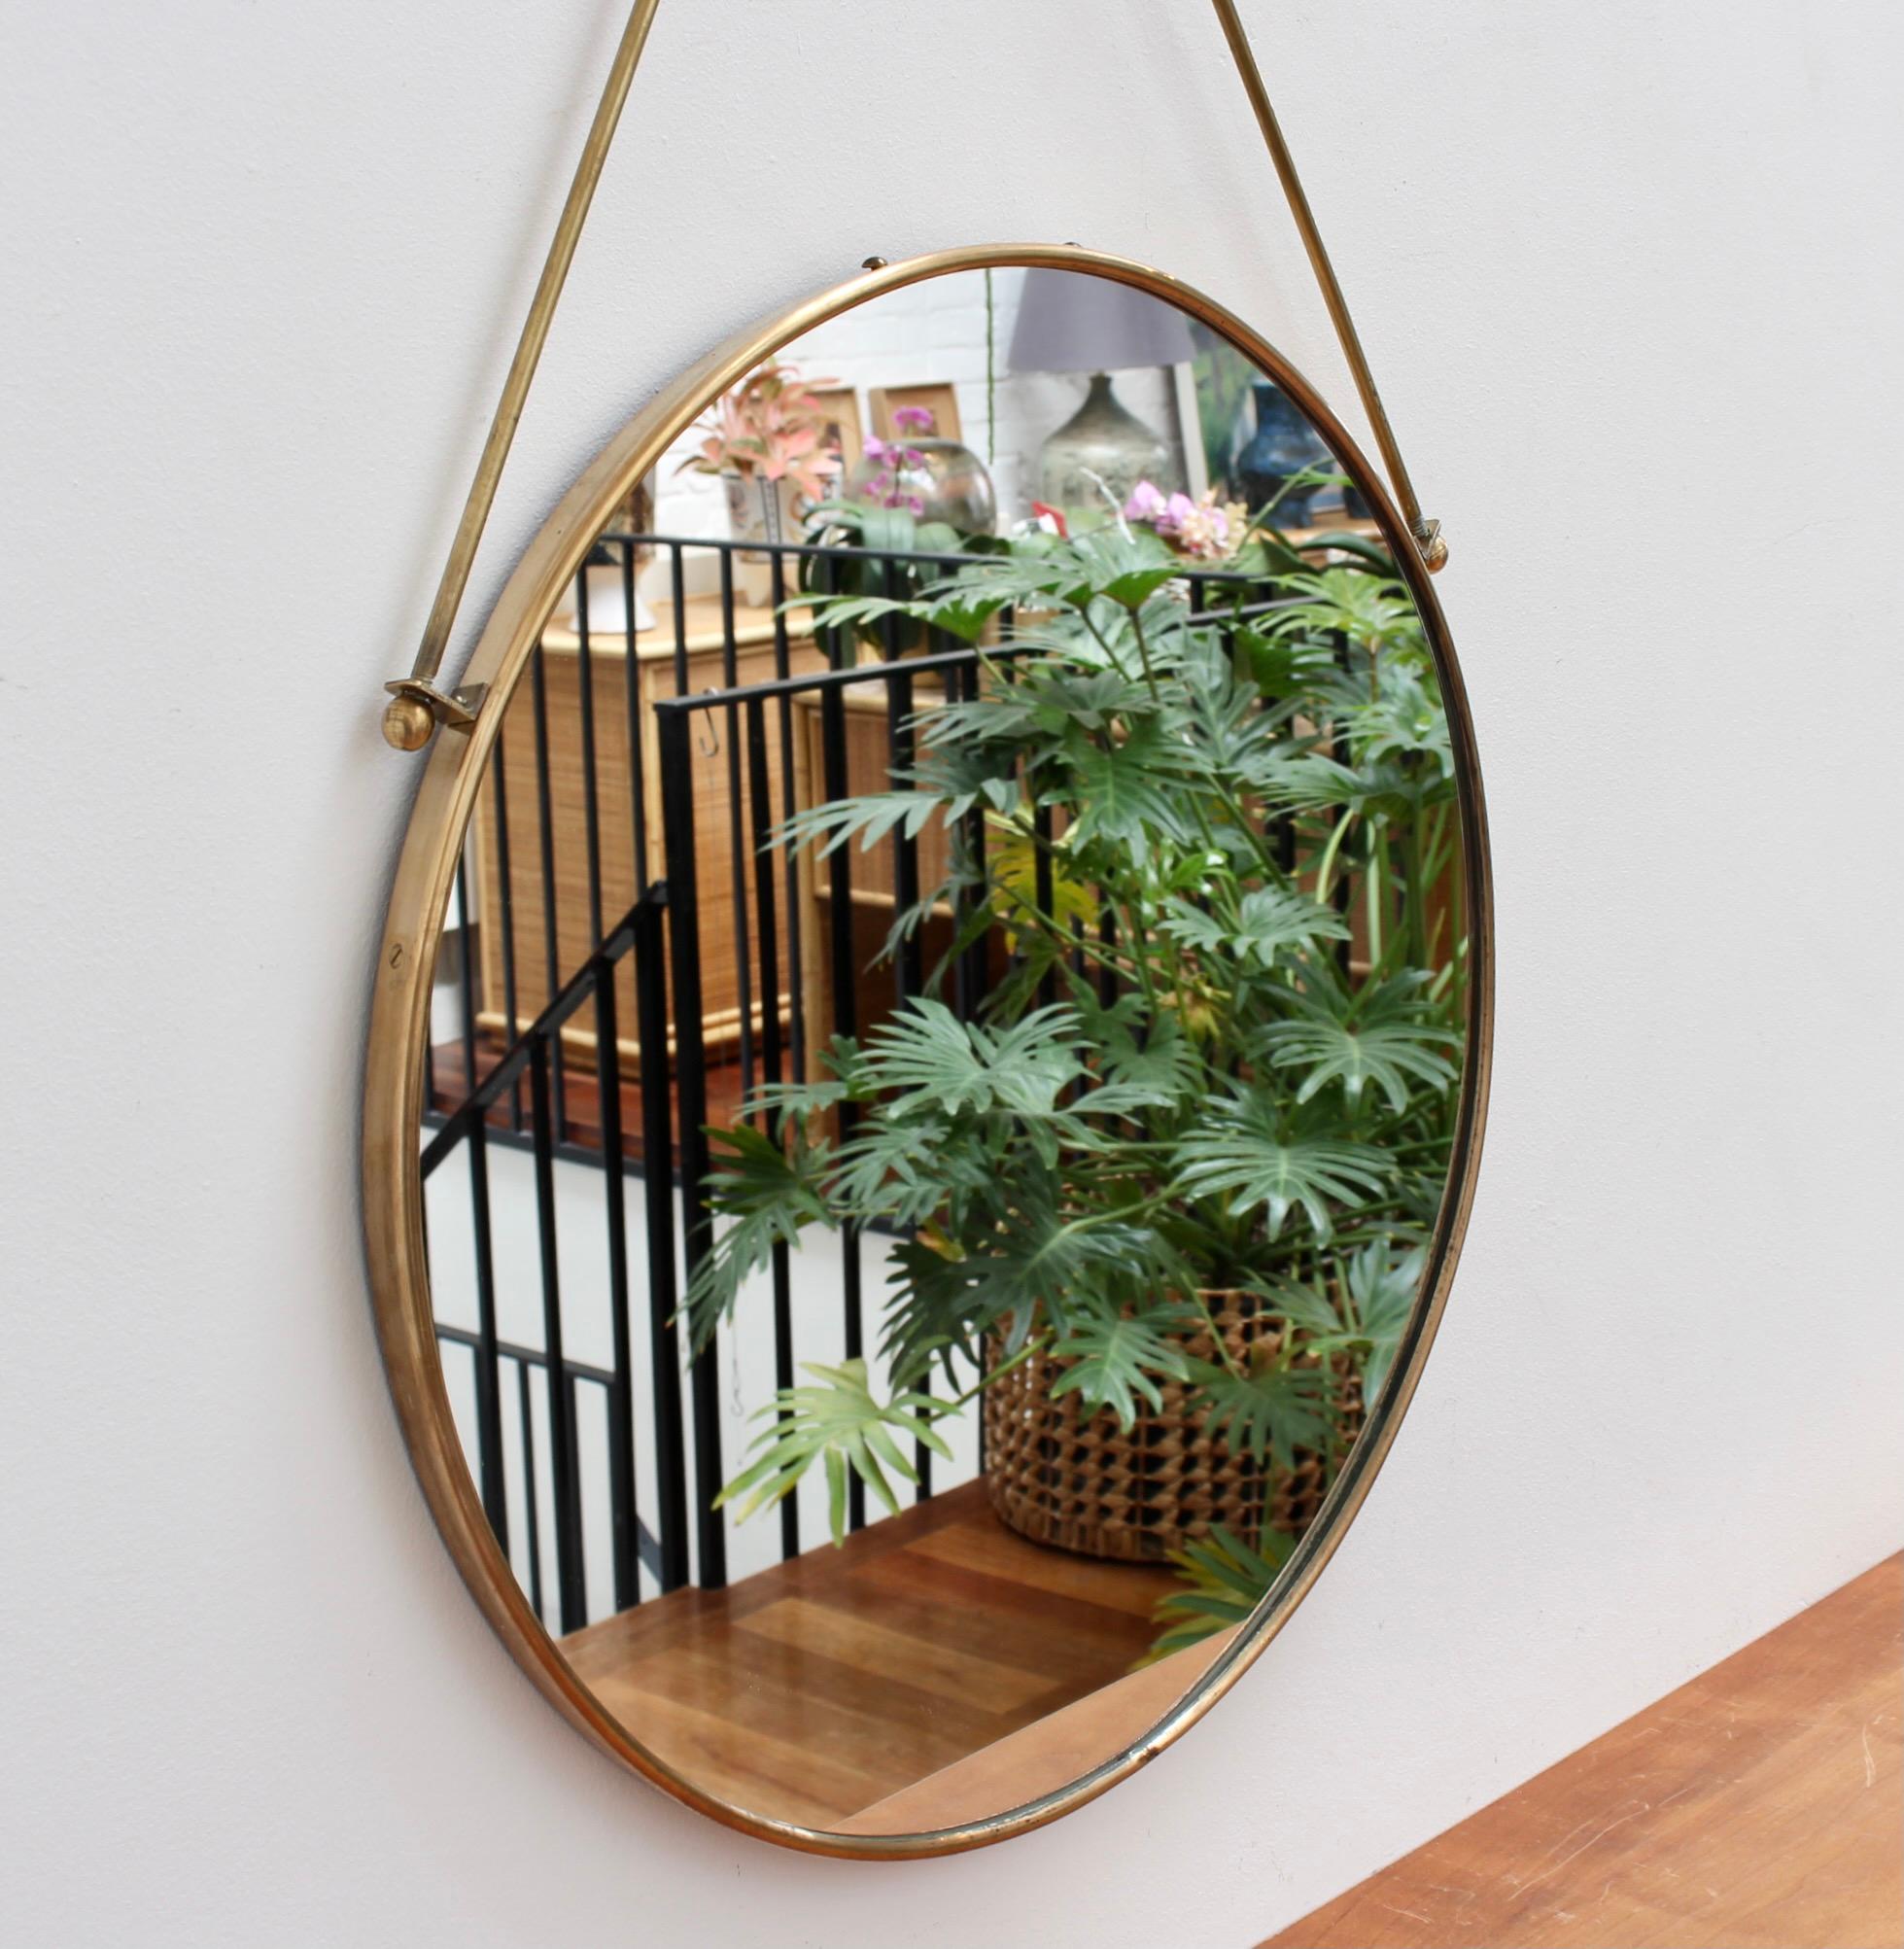 Mid-century Italian brass-framed wall mirror with decorative hanging rods (circa 1950s). The mirror is round with a characterful brass frame and unique hanging rods topped with a decorative finial. It is distinctive in the Italian modern style. The